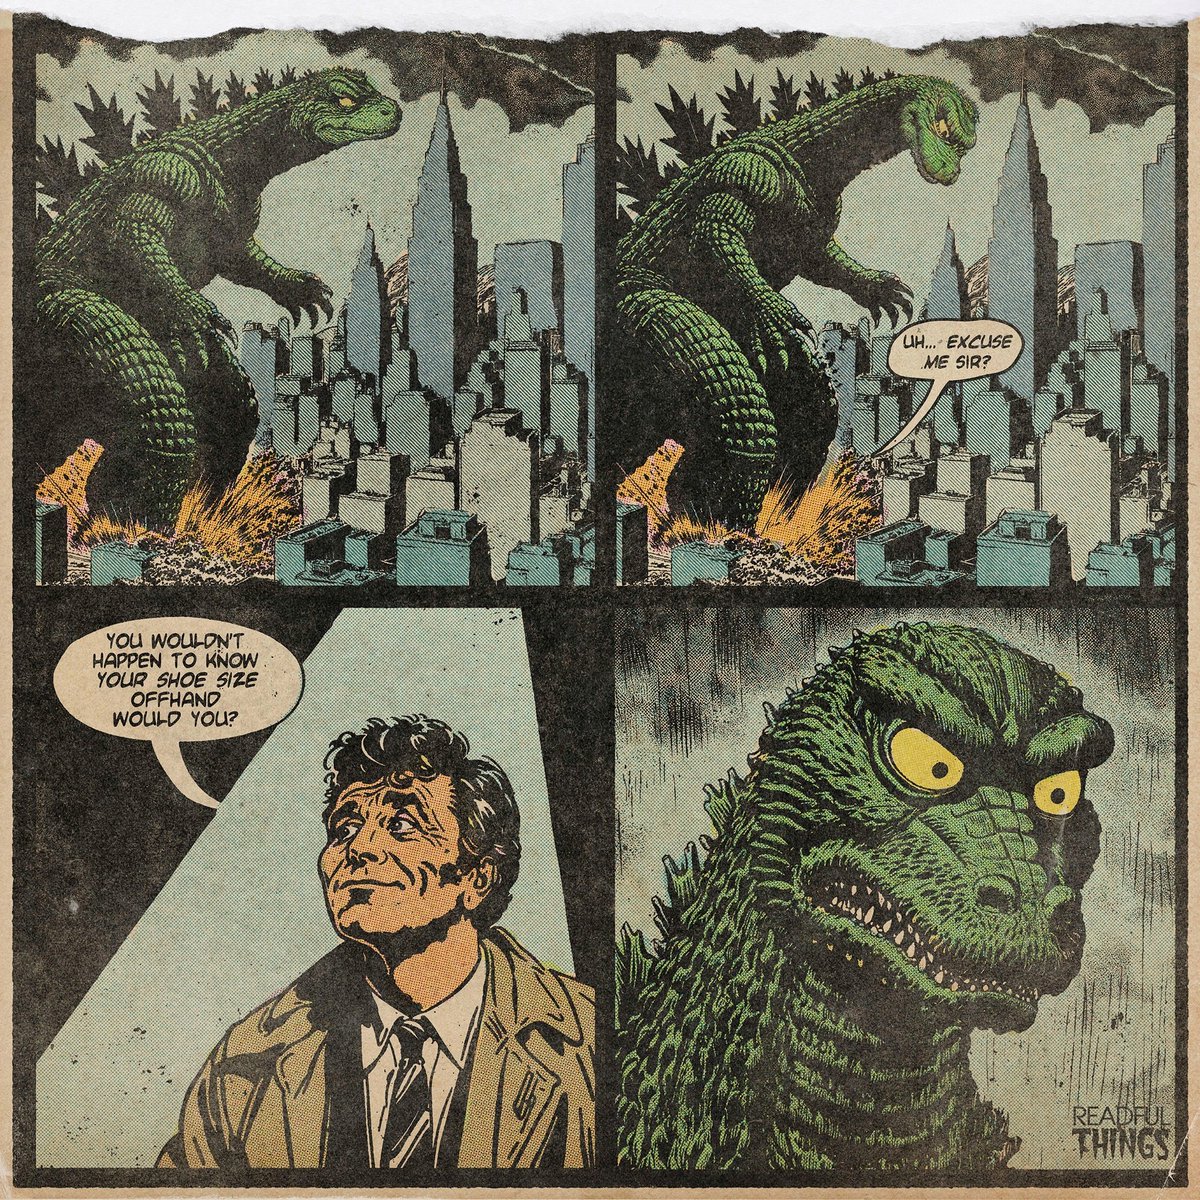 Uh-oh, godzilla is in trouble now